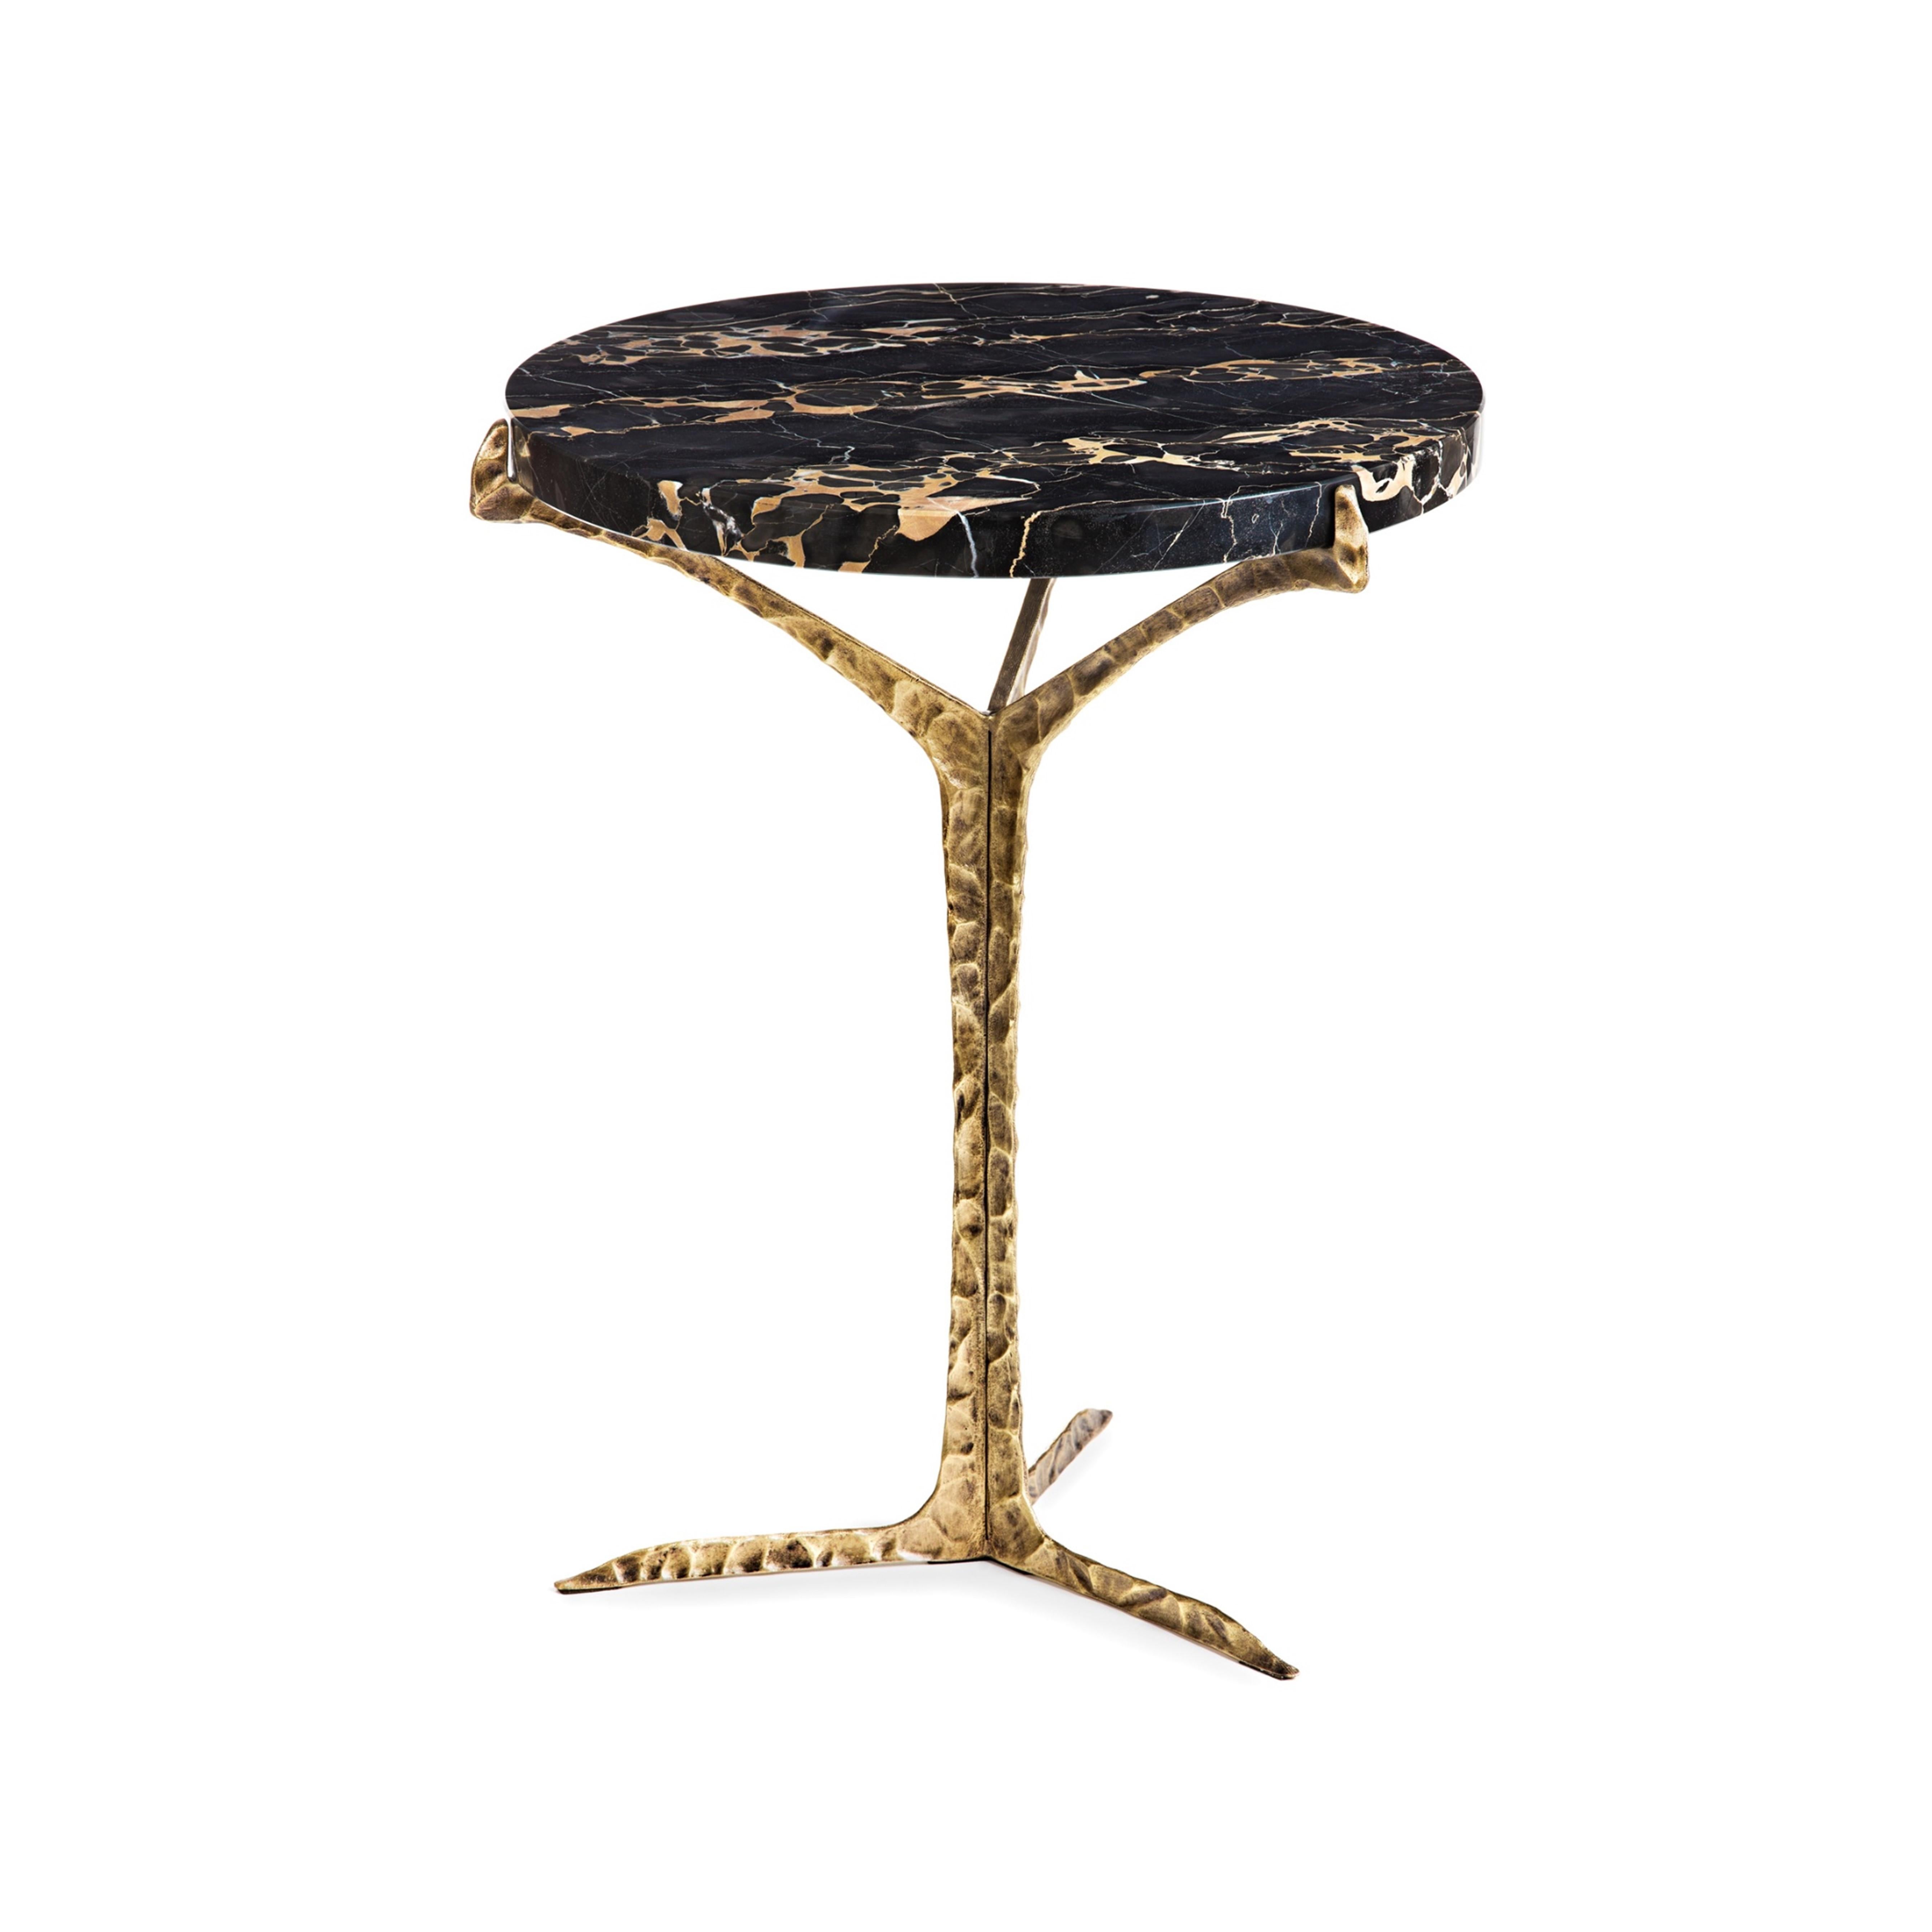 Alentejo side table is a glimpse over the South of Portugal where thousands of cork oaks trees raise their canopies to the sky.
Resembling the typical trees that spread across the horizon with their canopies gracefully balanced above the ground,